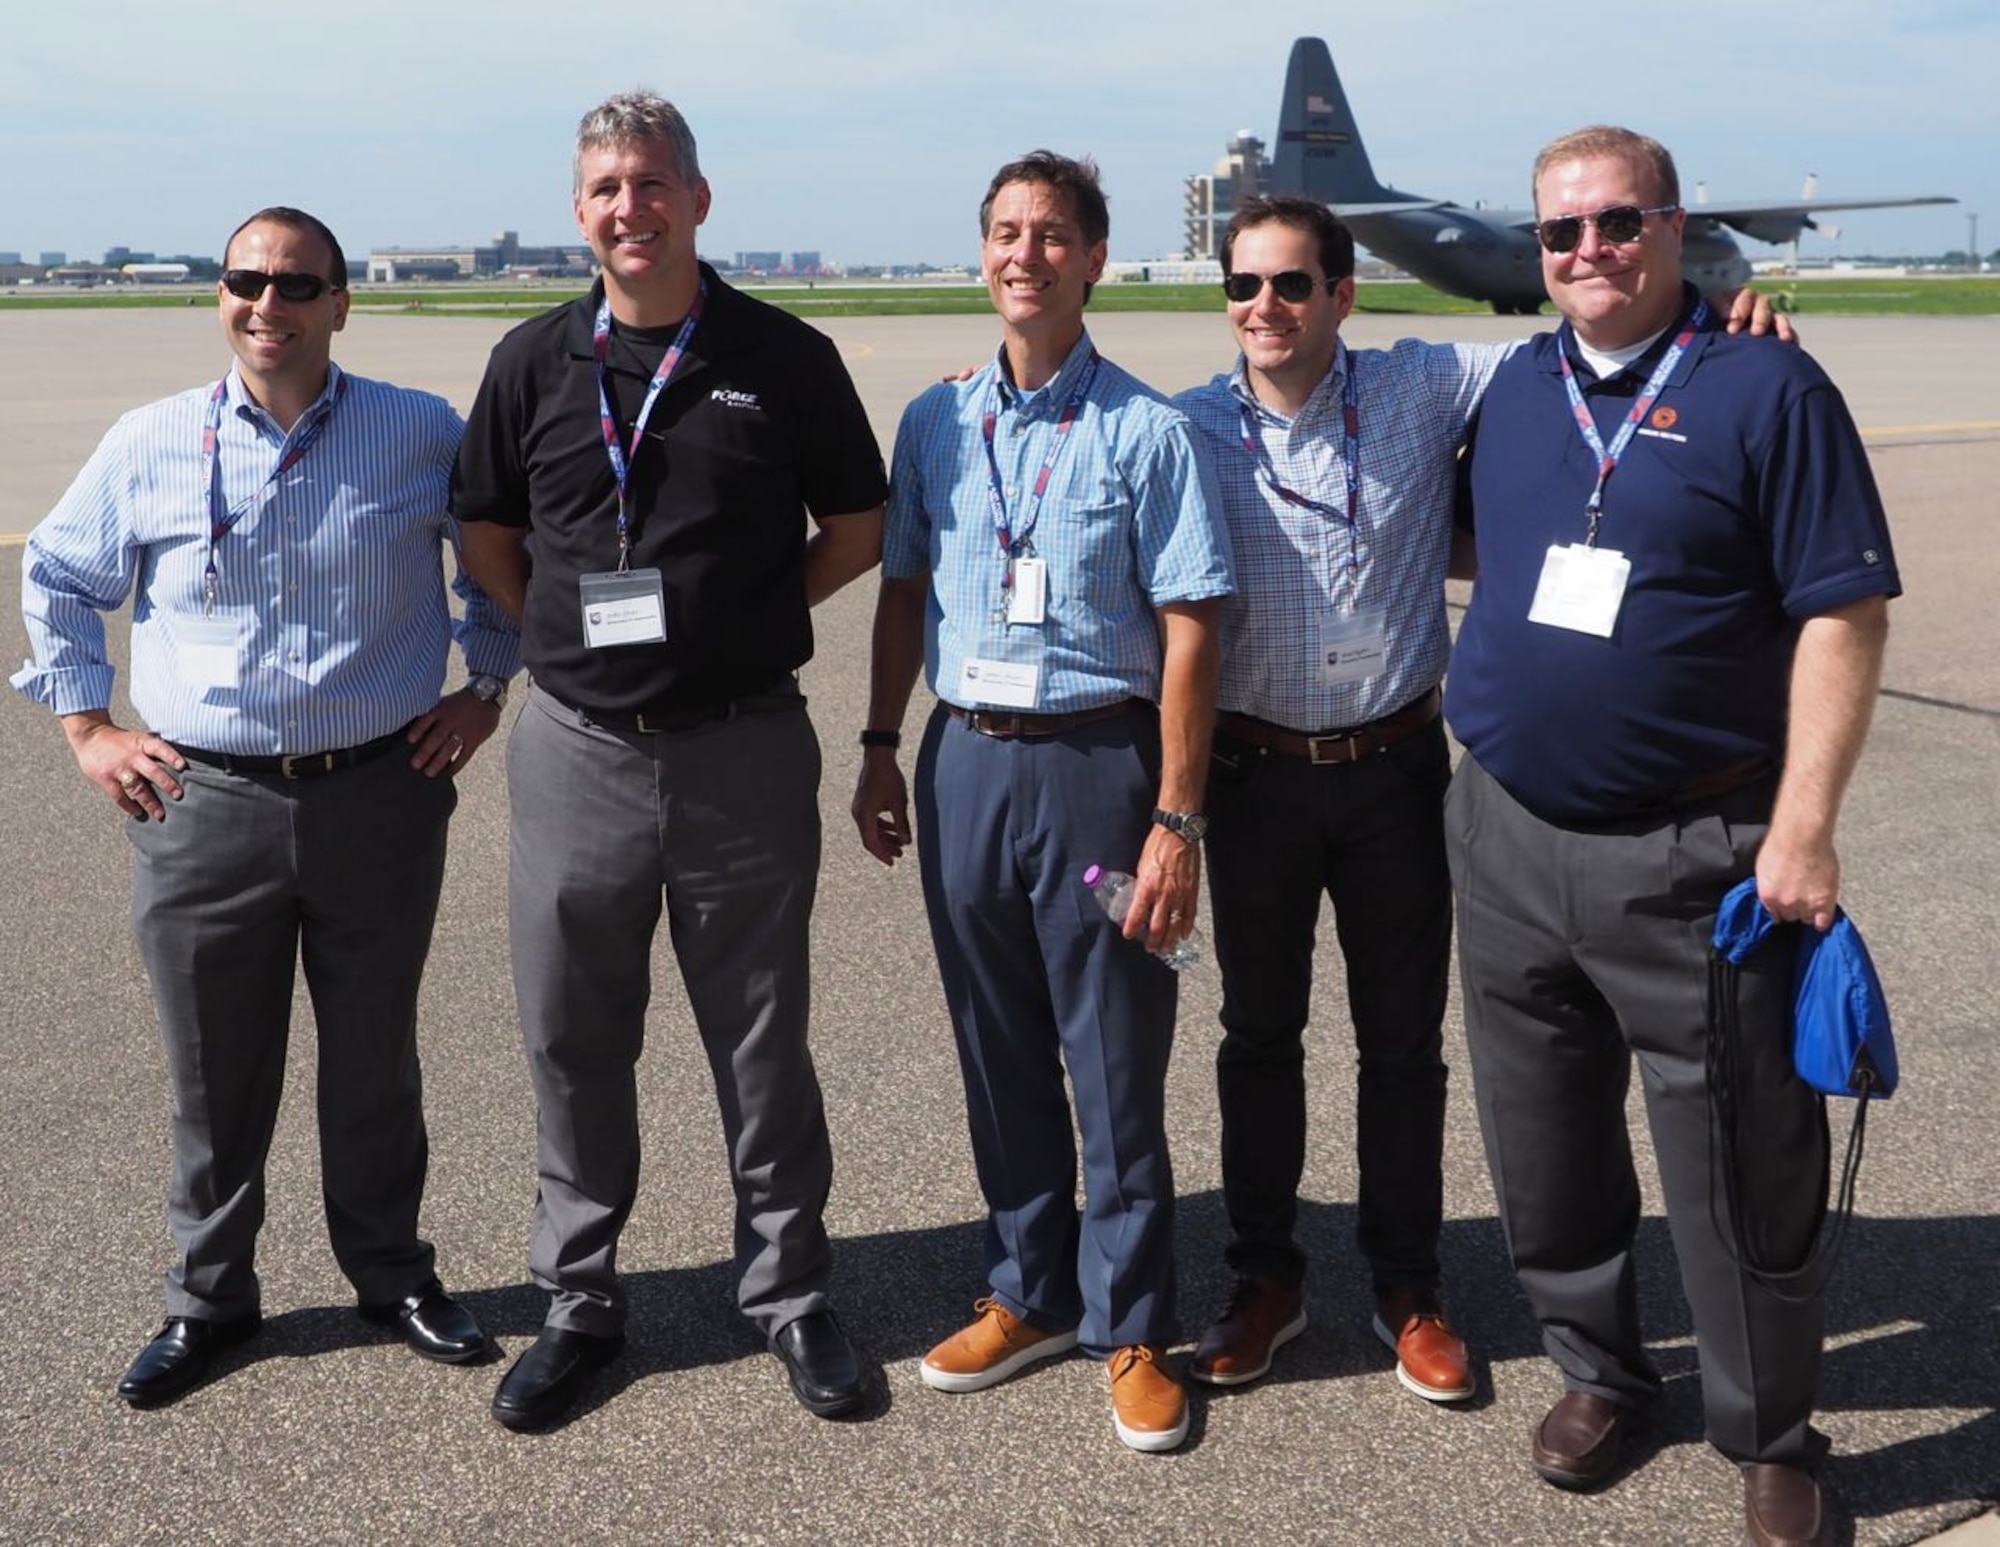 From left, Honorary Commanders Chris Passaro, John Stenz, James Meyer, Brad Ingber and Rick King visit the 934th Airlift Wing flightline. (Air Force Photo/Paul Zadach)